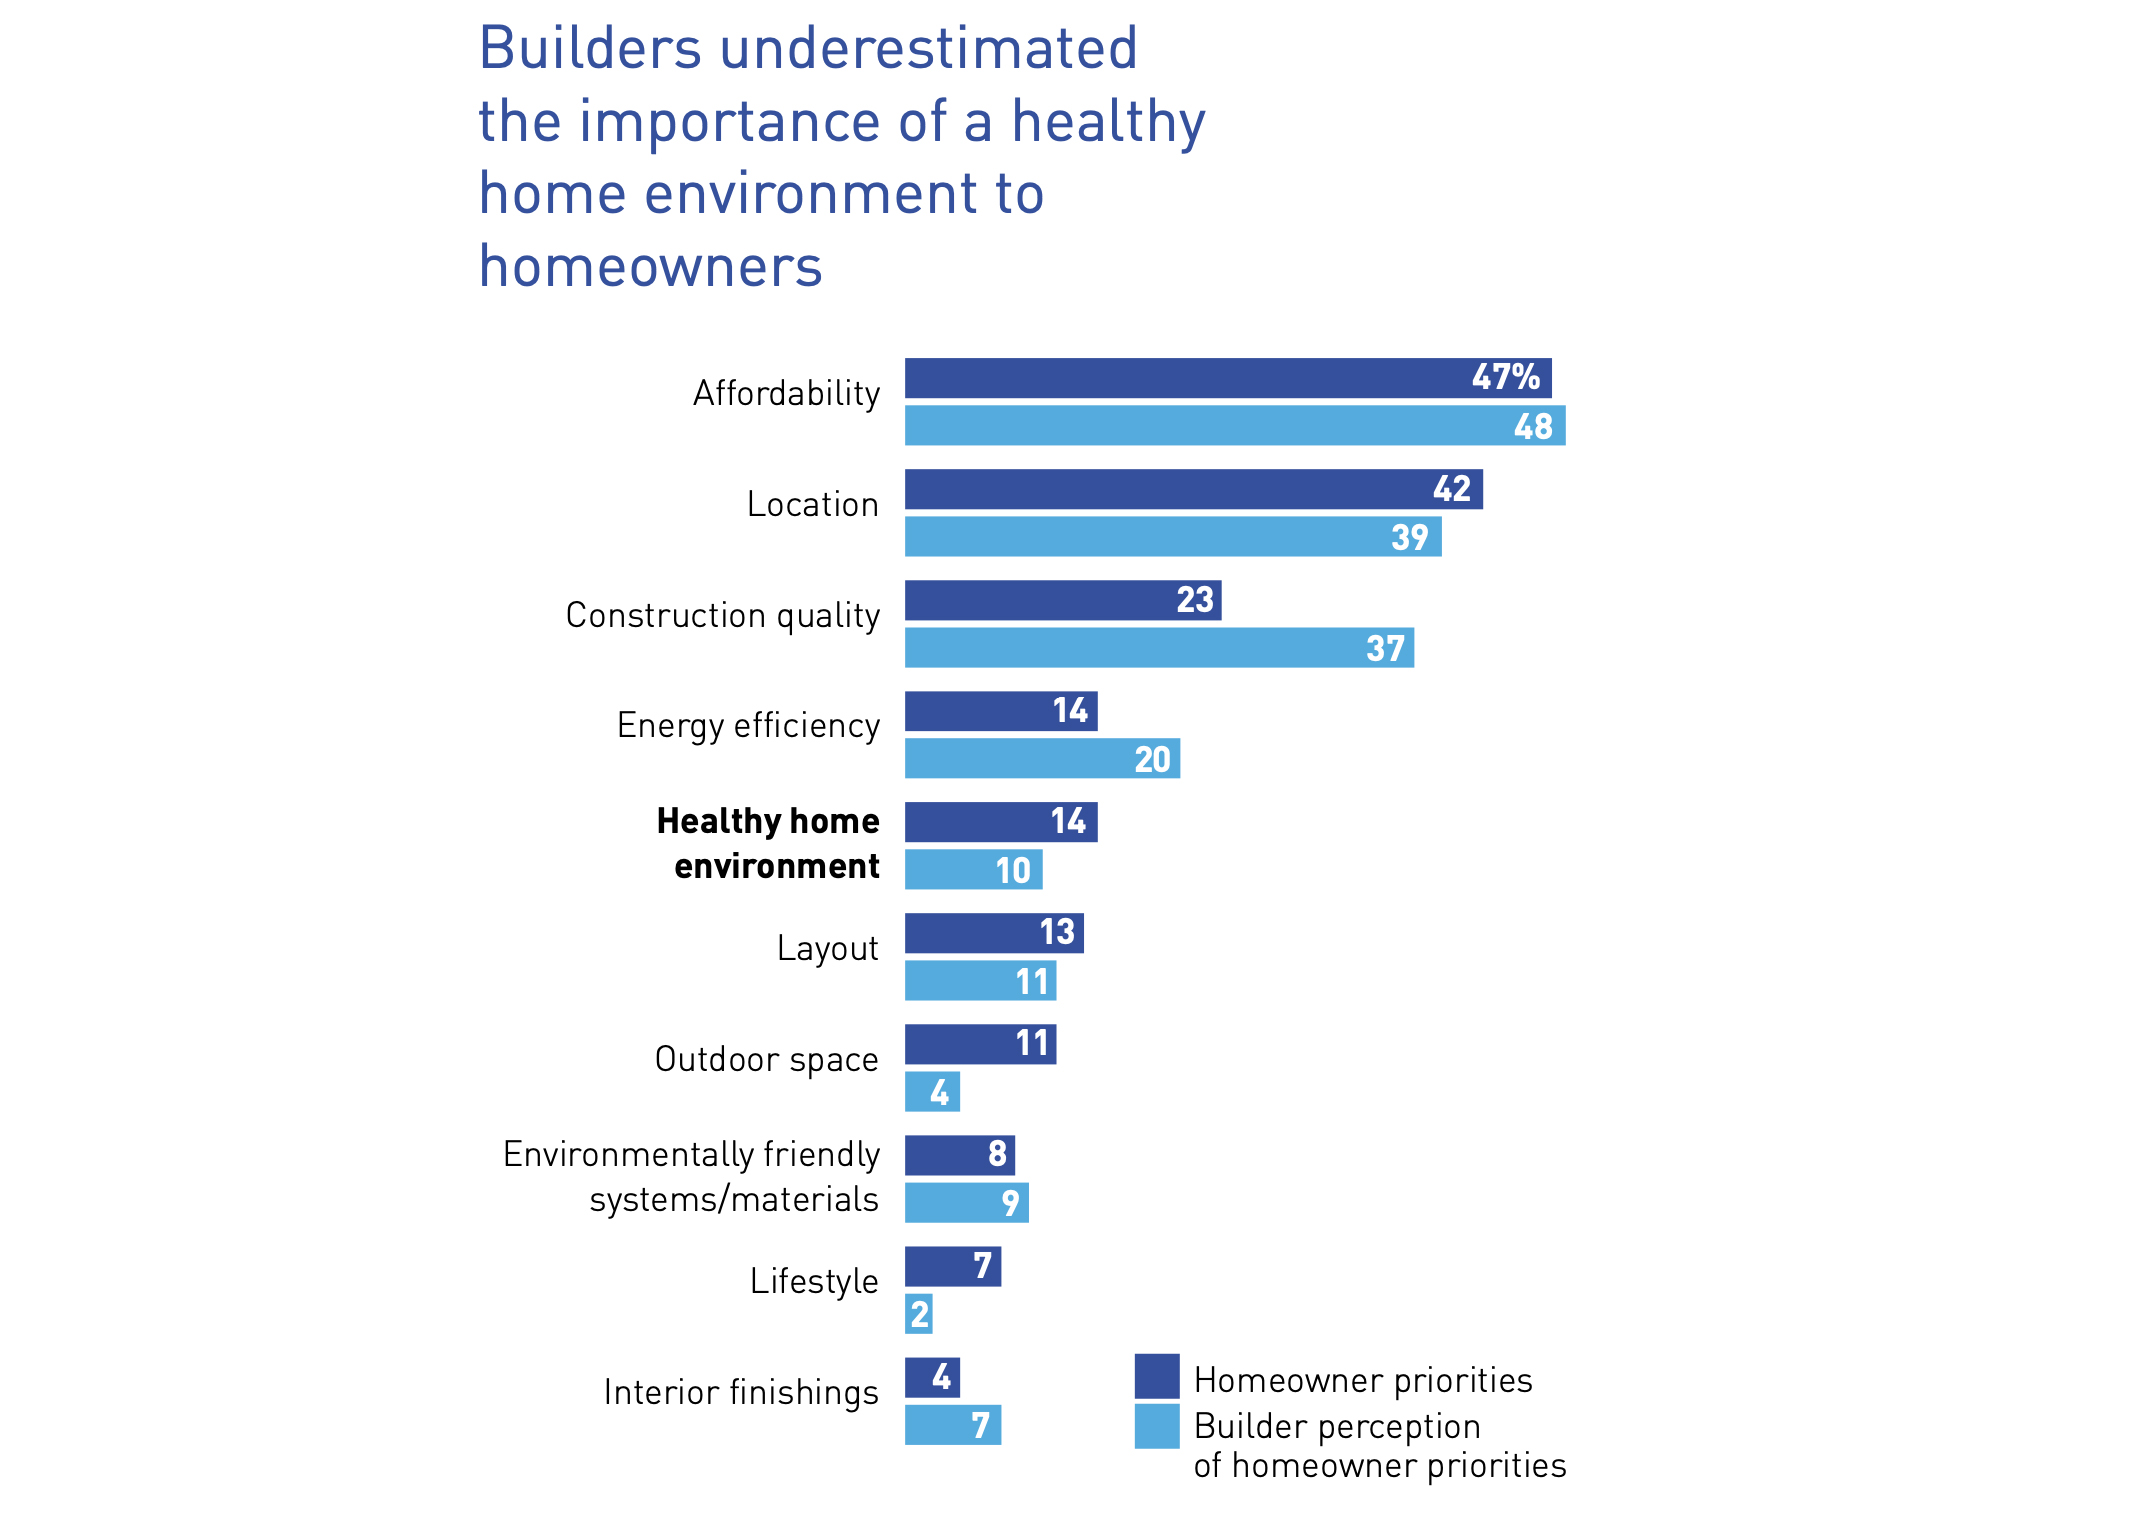 Benchmark perceptions in the building industry of healthy home environments